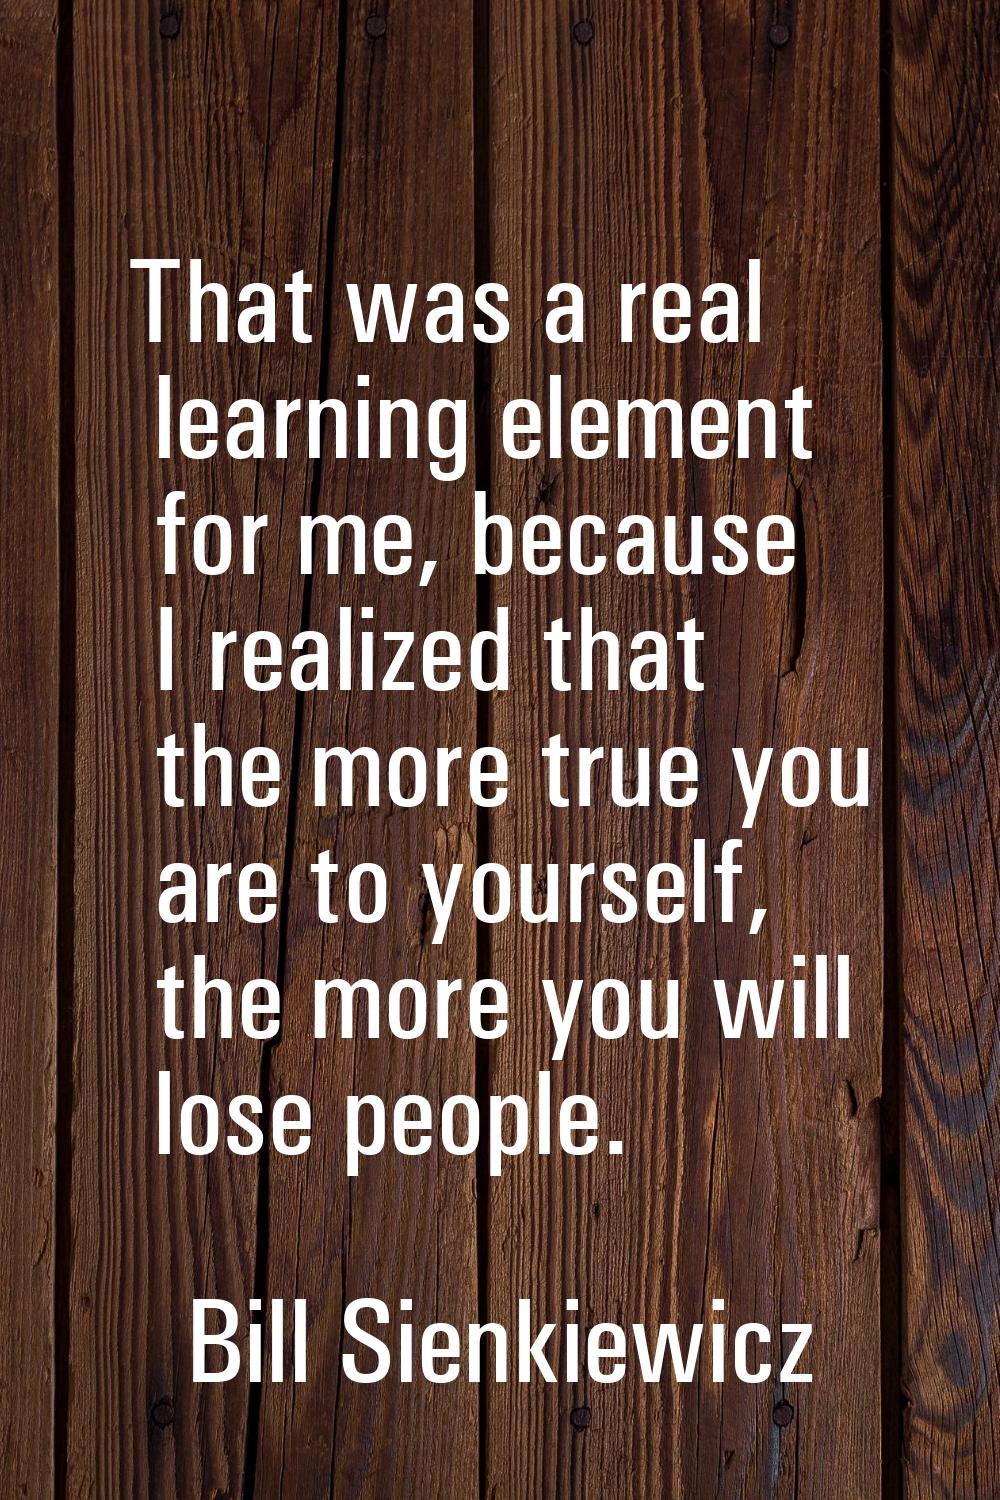 That was a real learning element for me, because I realized that the more true you are to yourself,